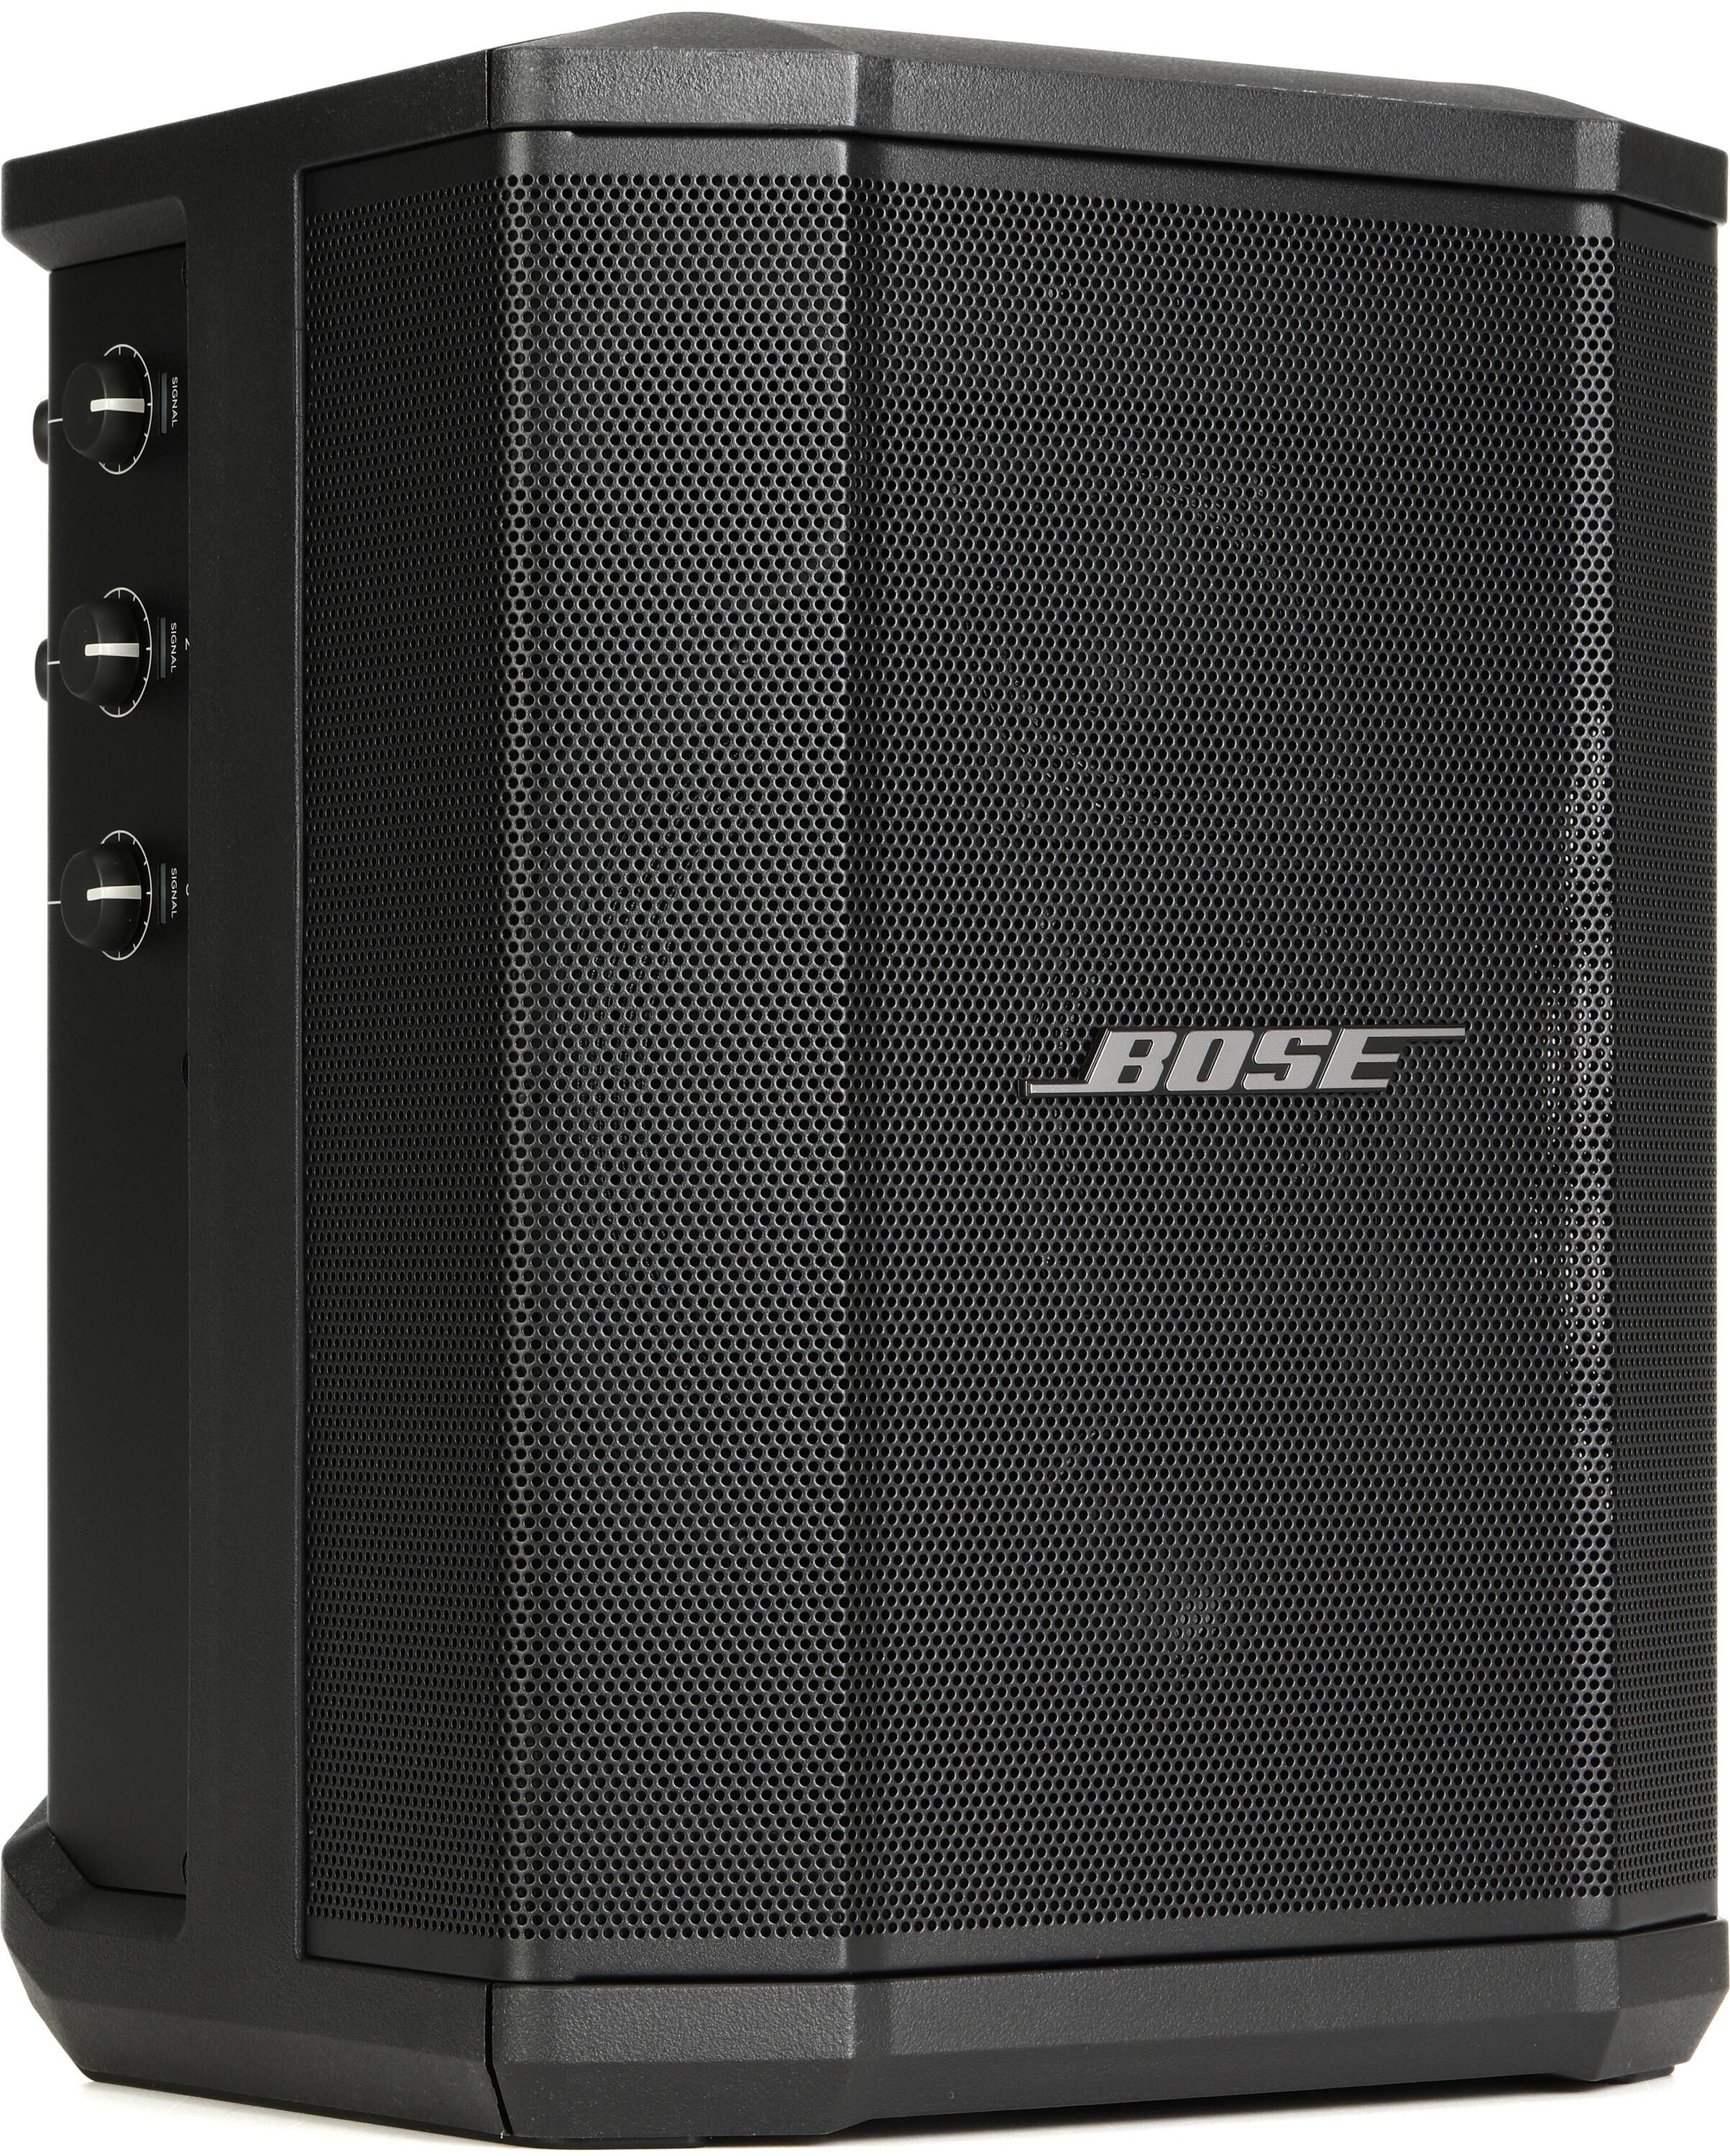 Bose S1 Pro Multi-position PA System with Battery Reviews | Sweetwater